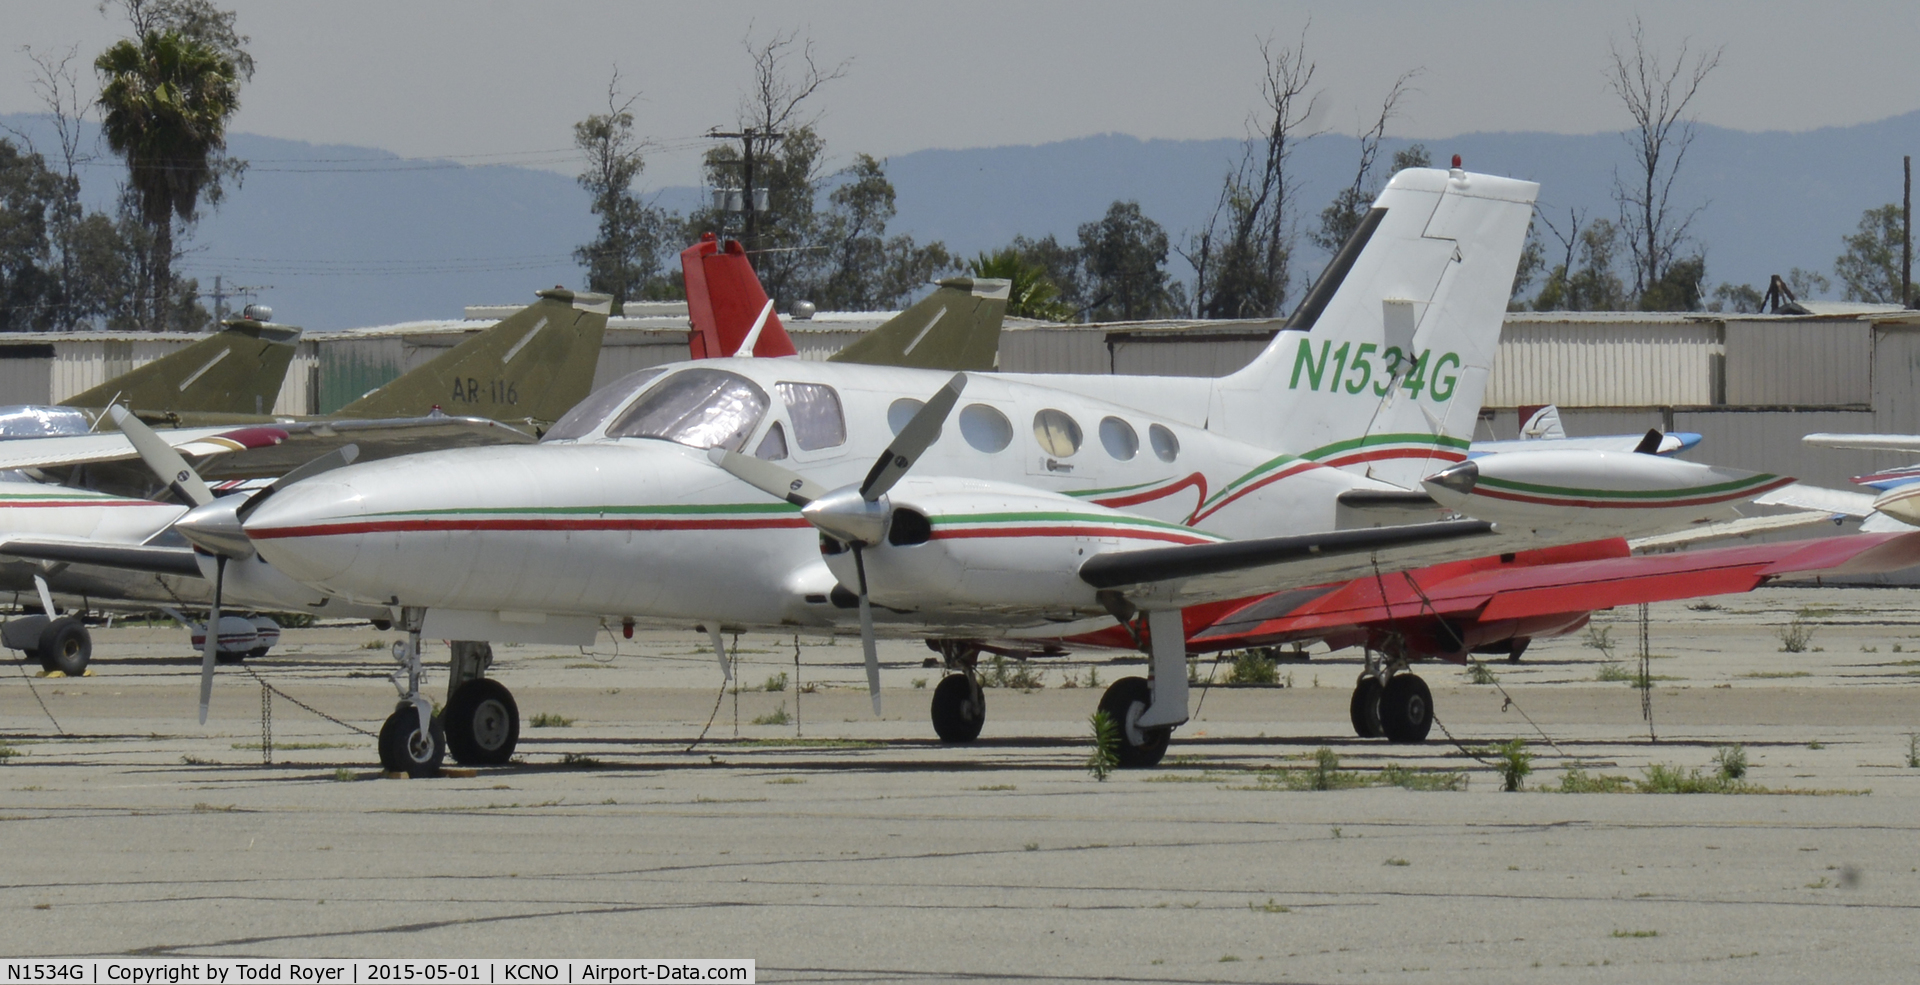 N1534G, 1974 Cessna 421B Golden Eagle C/N 421B0630, Parked at Chino